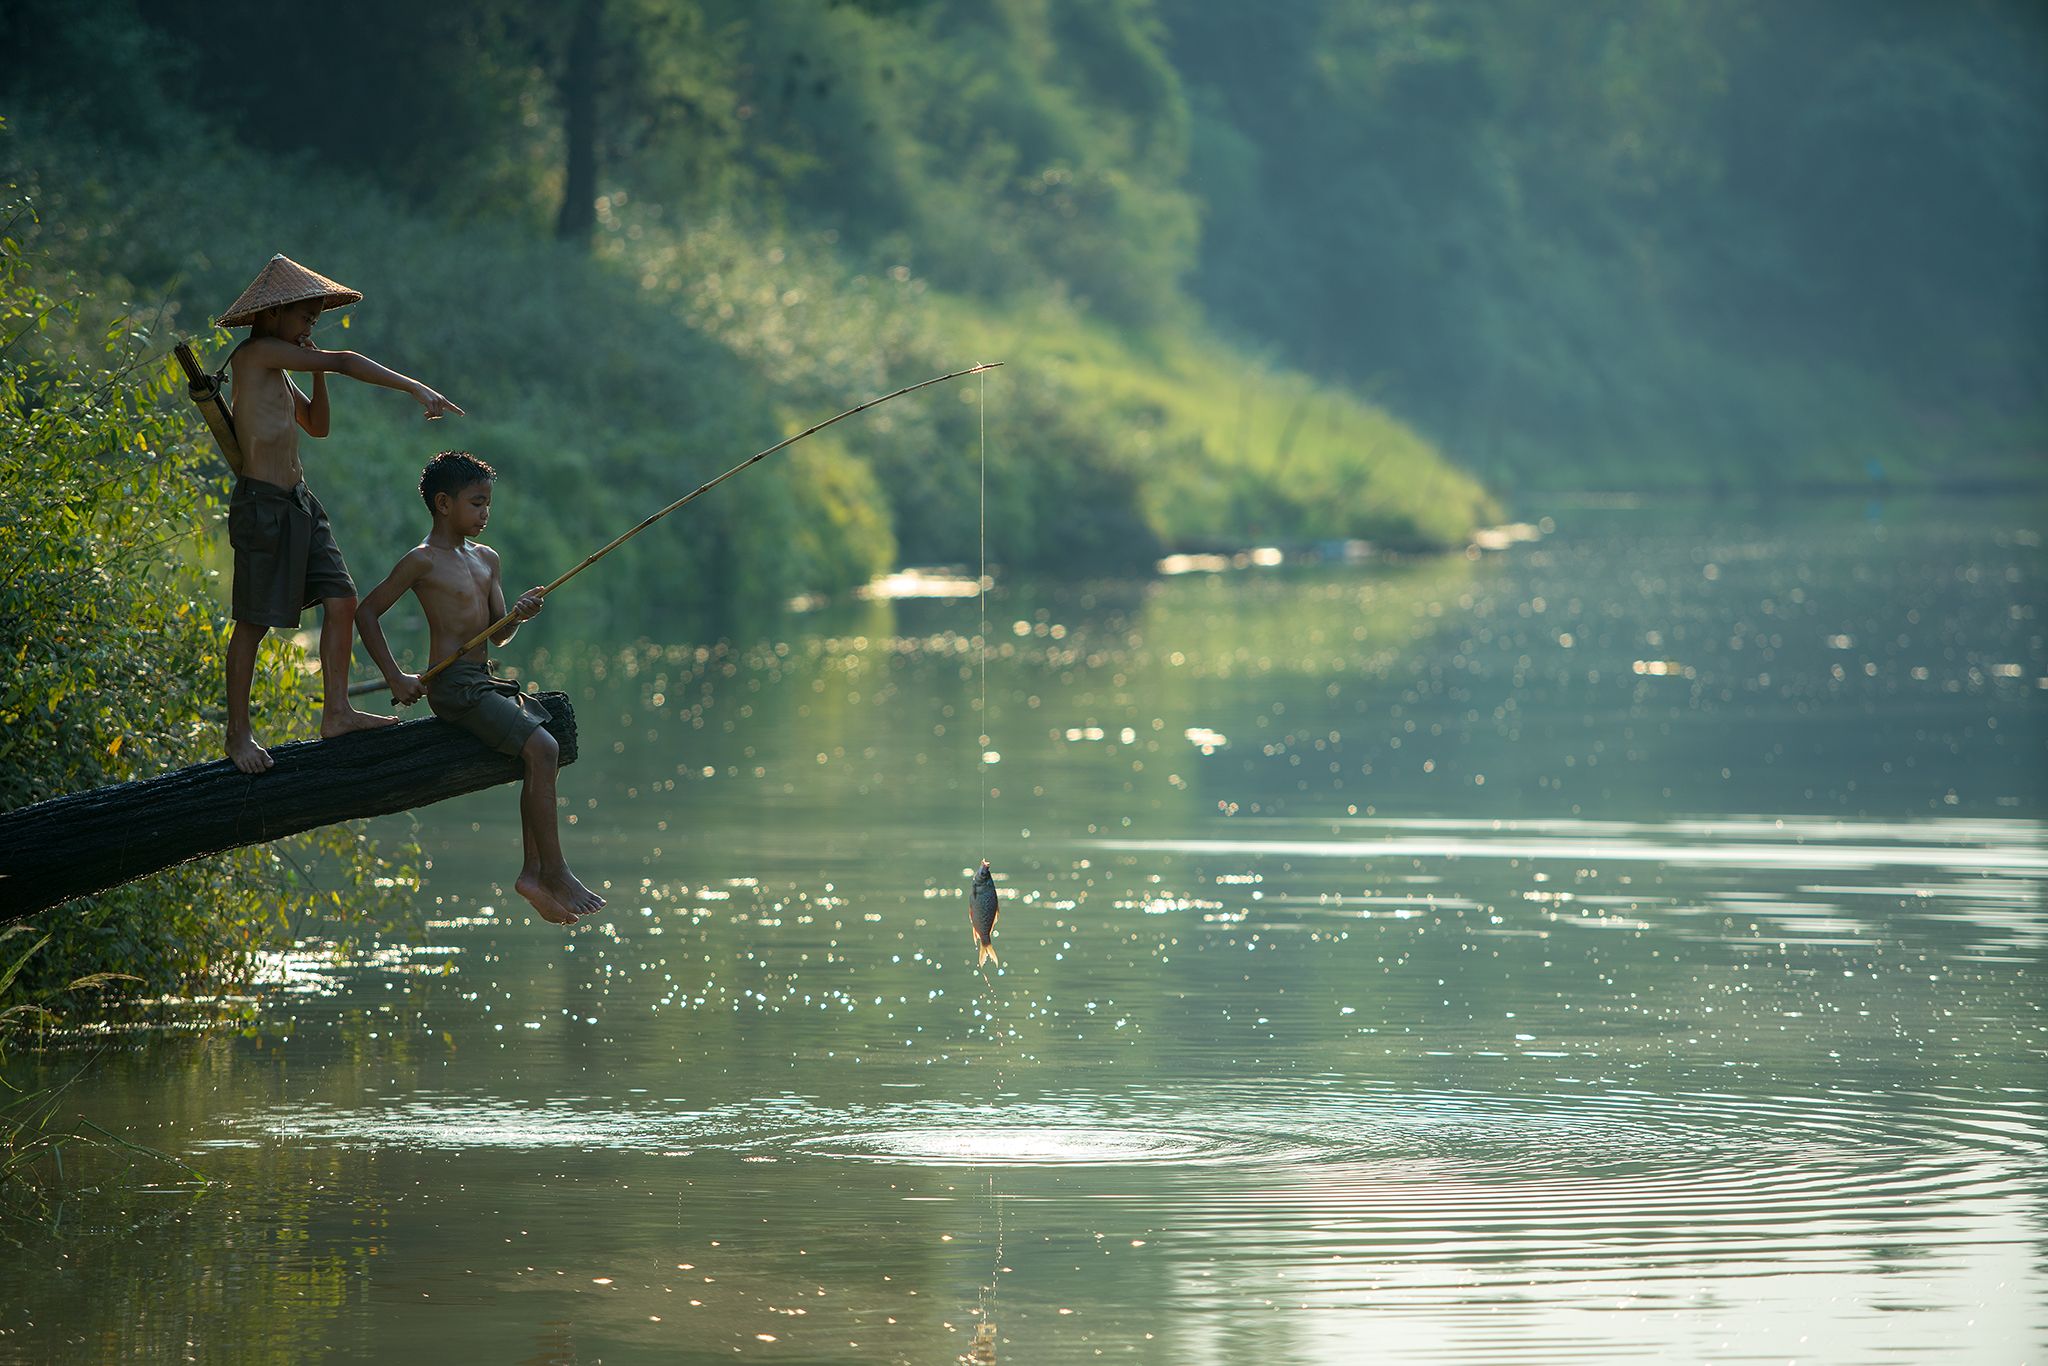 The Boys in the rural Thailand. Photographer SUTIPOND SOMNAM